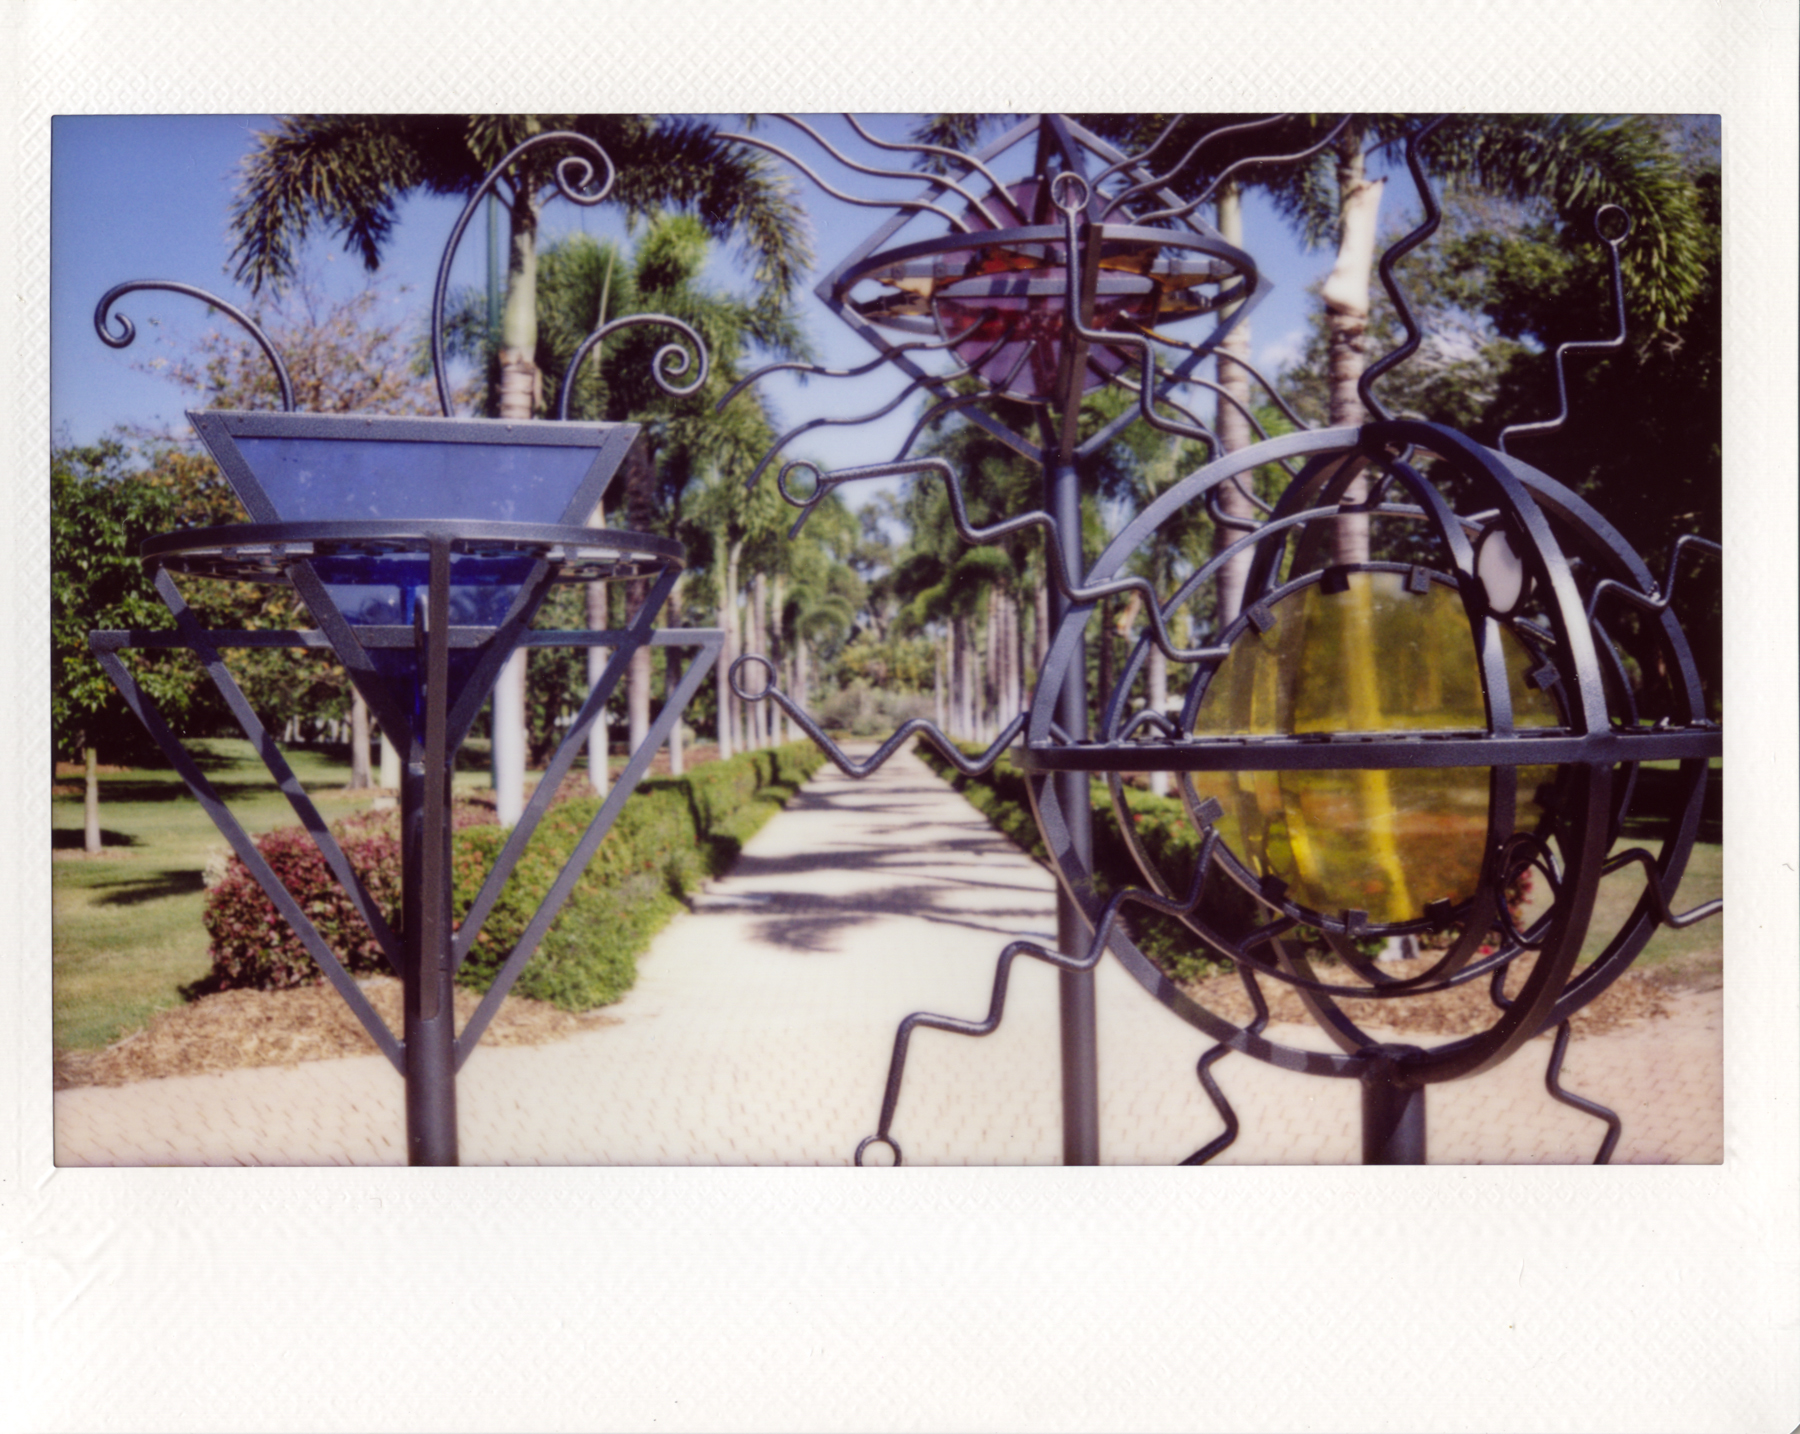 All images Fuji Instax Wide camera and film